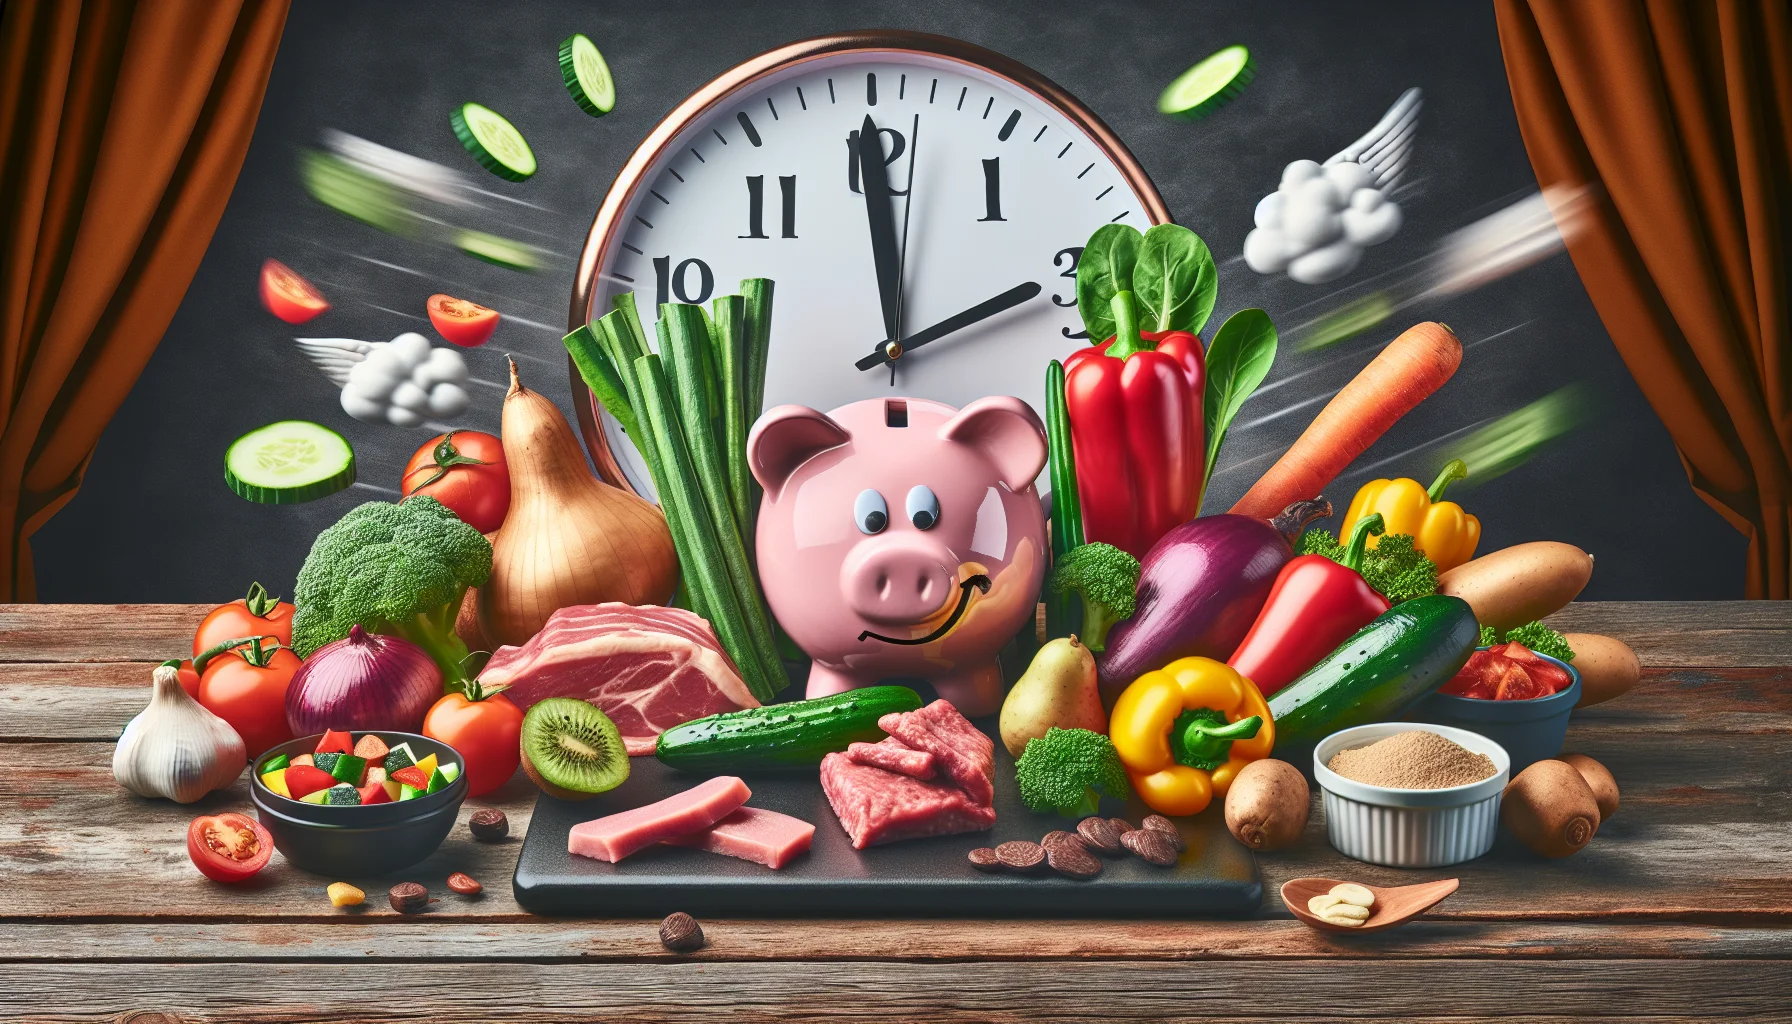 Create a comical and realistic image that captures the essence of a 15-minute dinner recipe. The scene includes an array of colorful vegetables and lean proteins arranged in a fun and quirky way, suggesting they are in a race against time. The food items could be given caricatured faces, emphasizing the surprise element. The background could hold a ticking clock, symbolizing the quick cooking time. On one part of the image should be a piggybank with wings, symbolizing the cost-efficient aspect of the meal preparation. This should be appealing and encourage people to eat healthy on a budget.